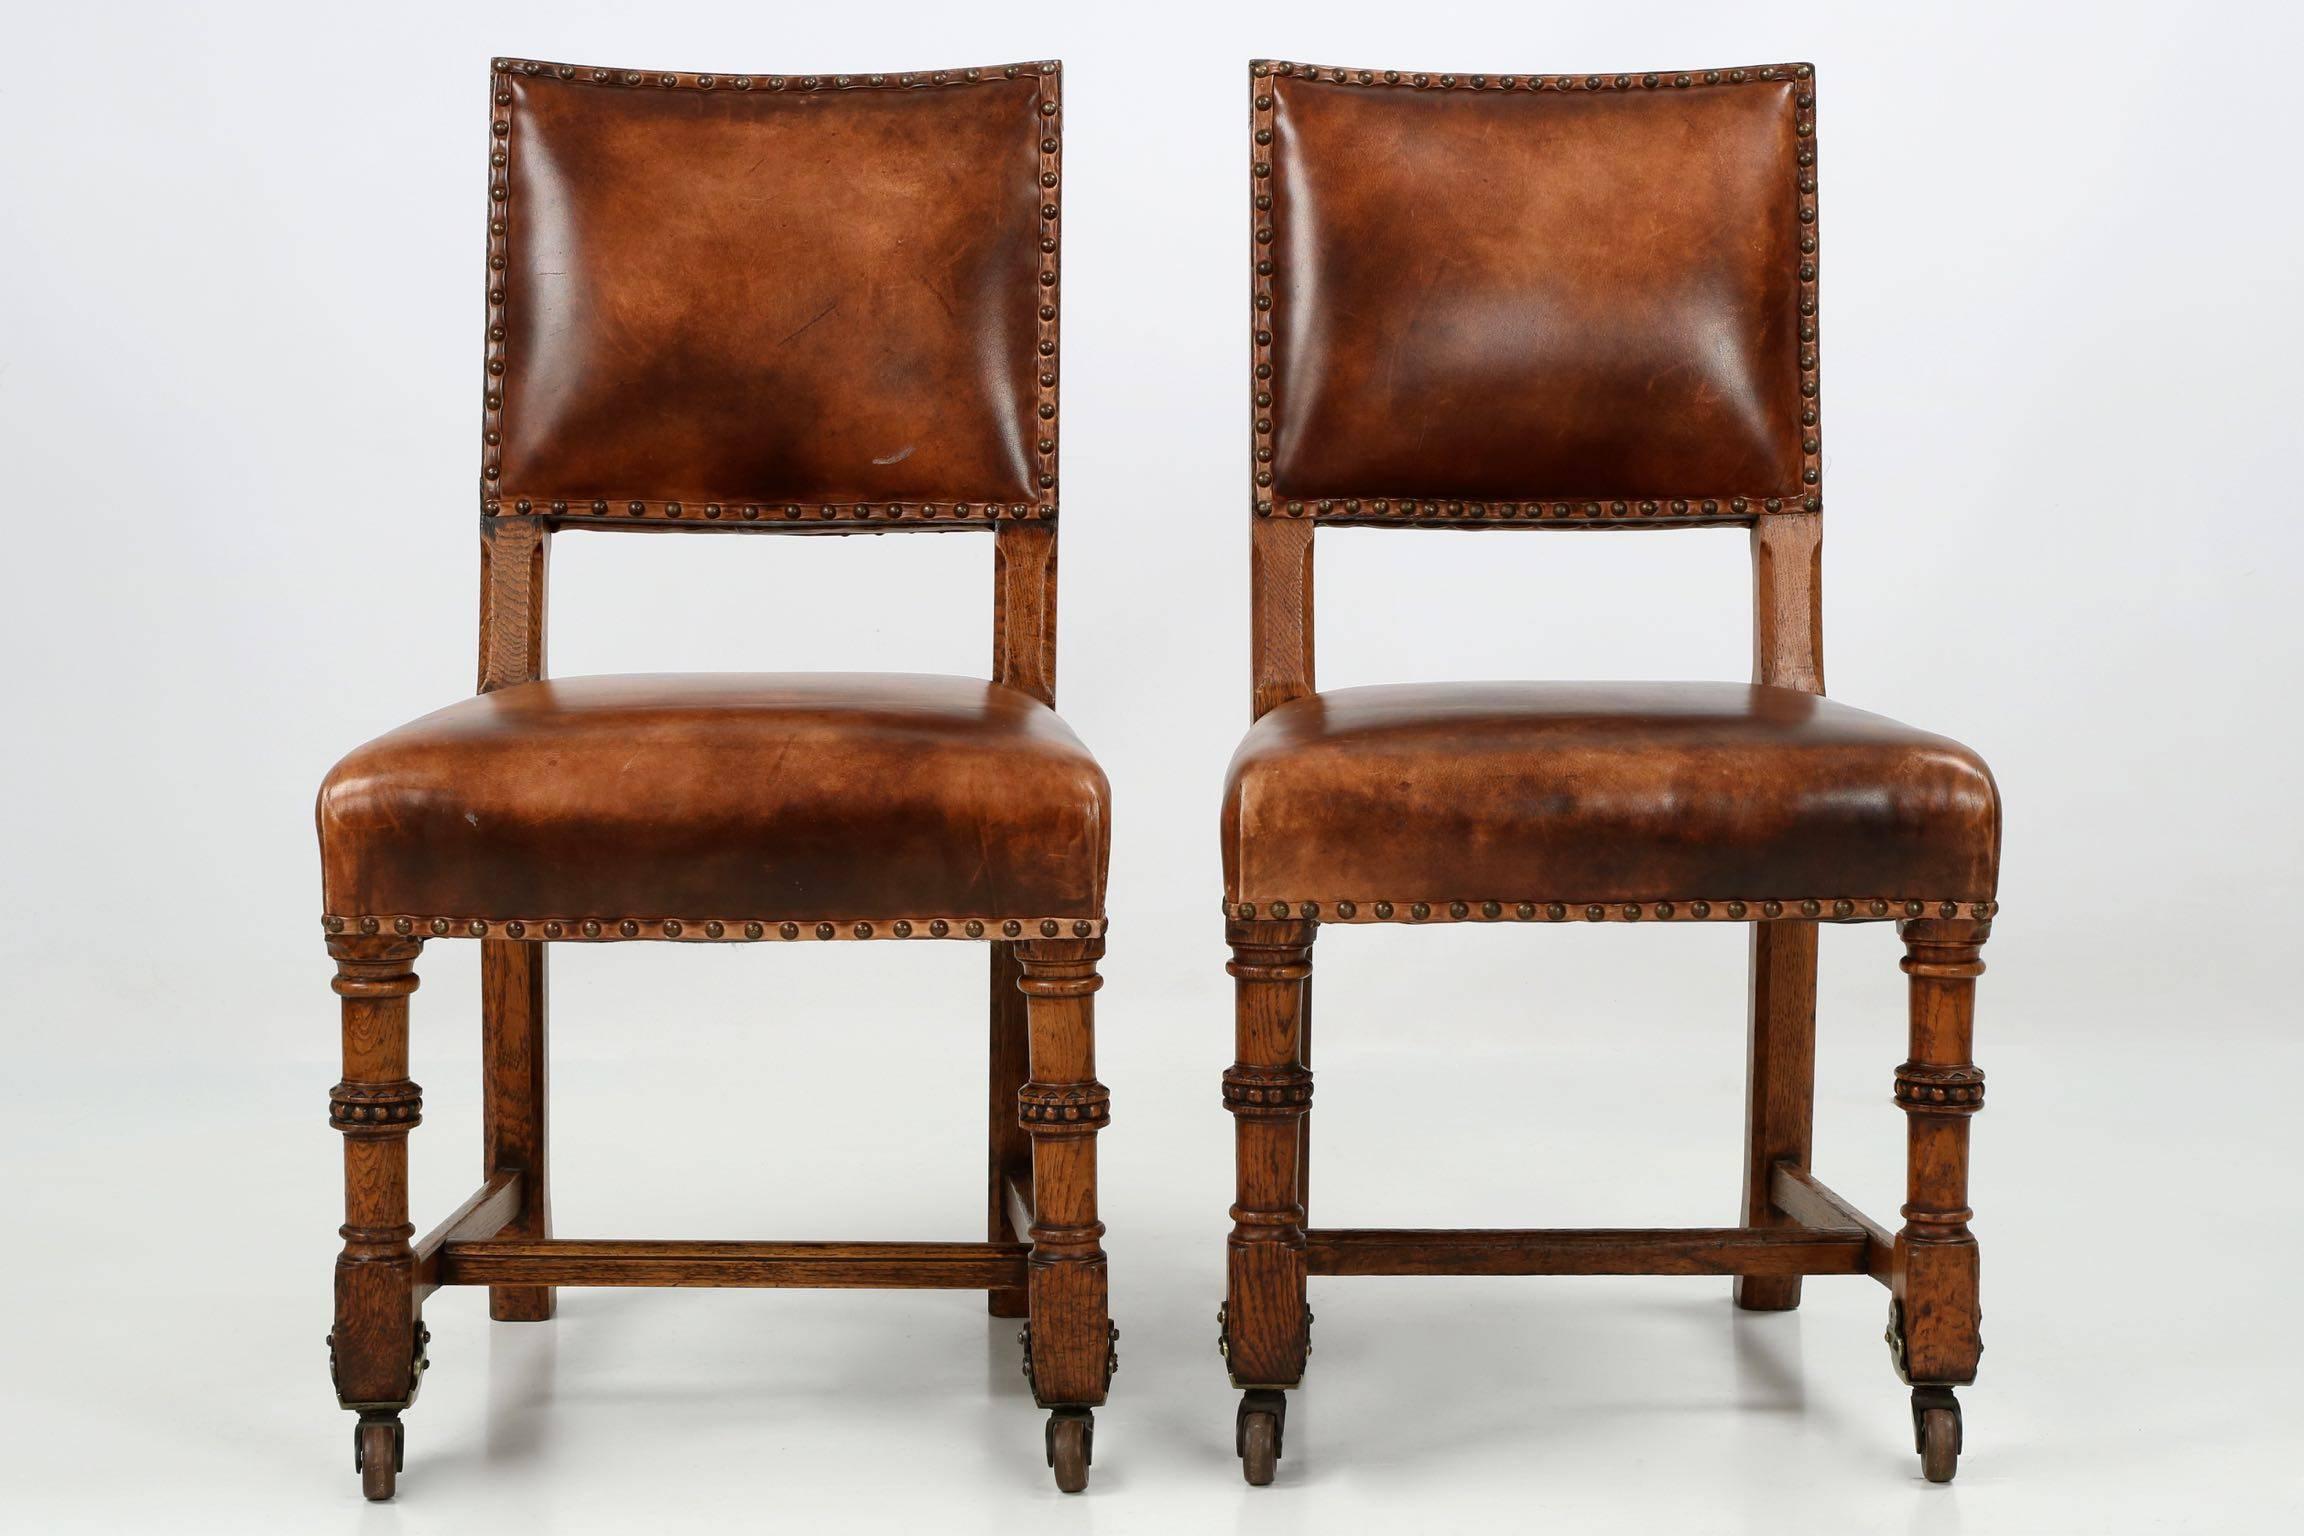 Most attractive and pleasant, this gorgeous pair of early 20th century leather upholstered side chairs exhibit the nostalgia of a smoky study or library. They are masculine and bold forms that exhibit strength in all components of the design - the